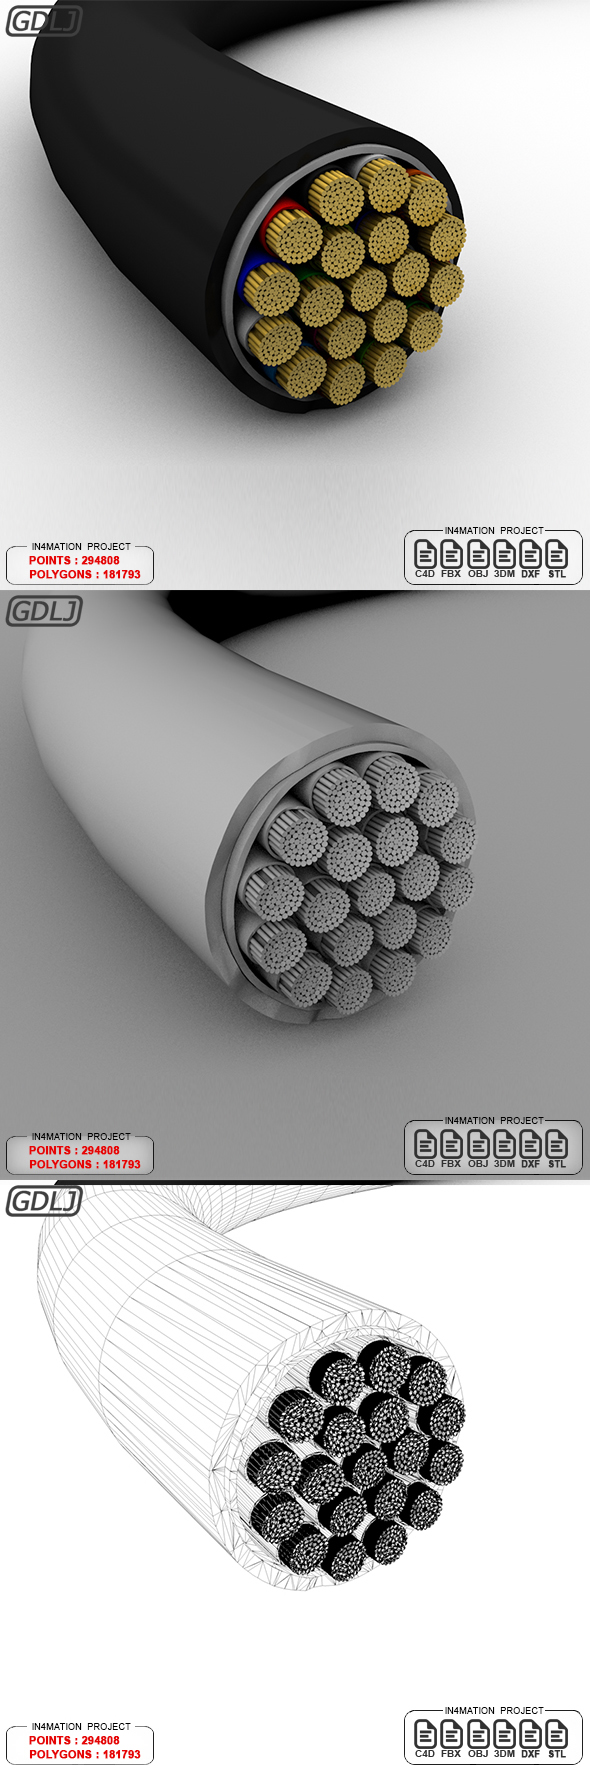 Electrical Wires 3D - 3Docean 21824033